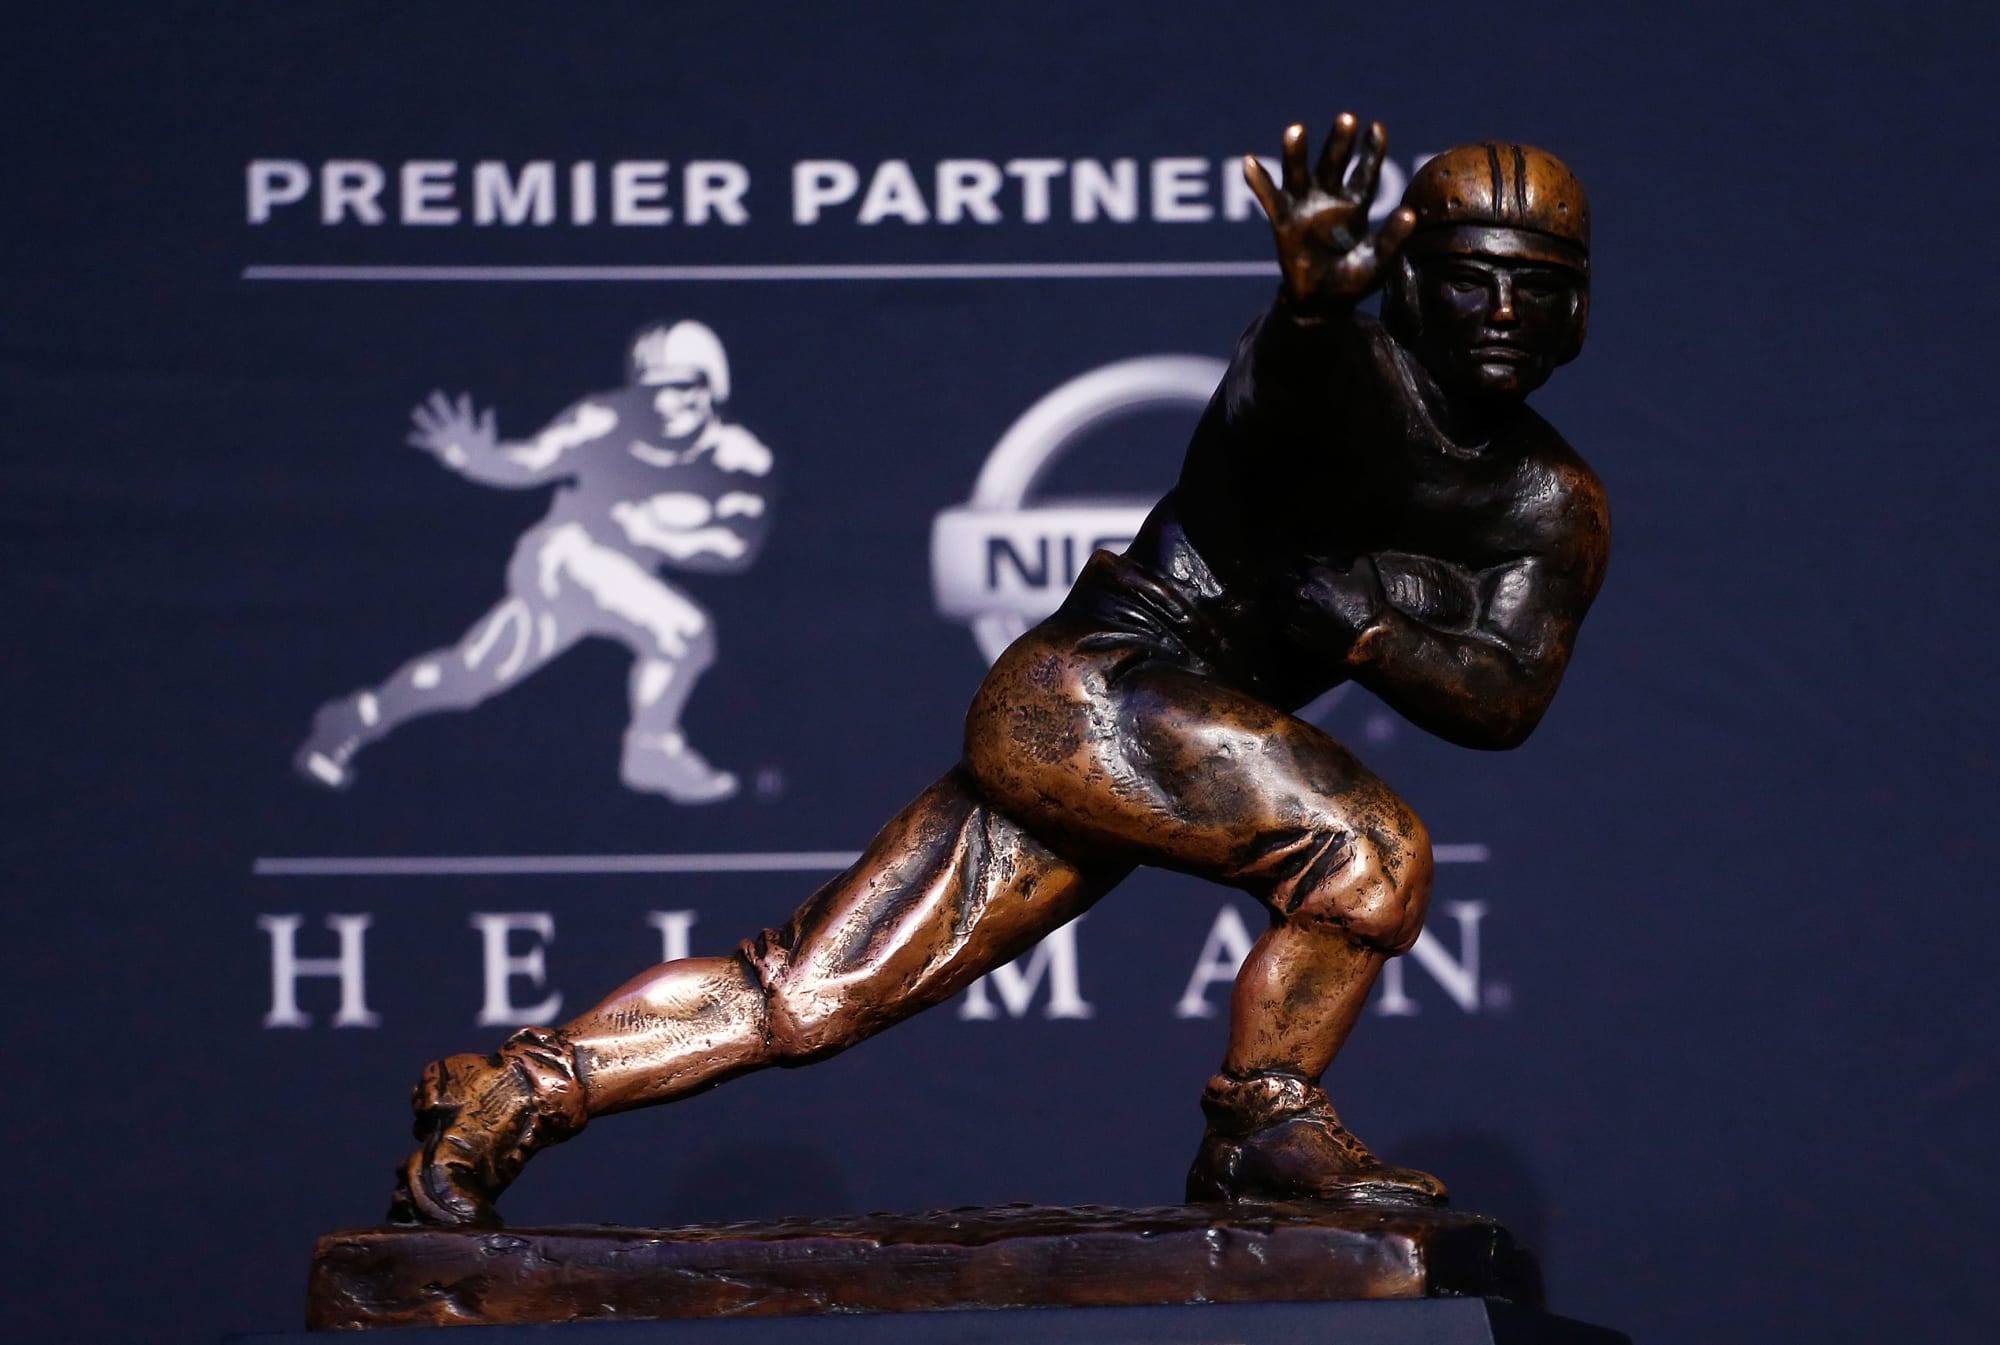 what time is the heisman trophy presentation today